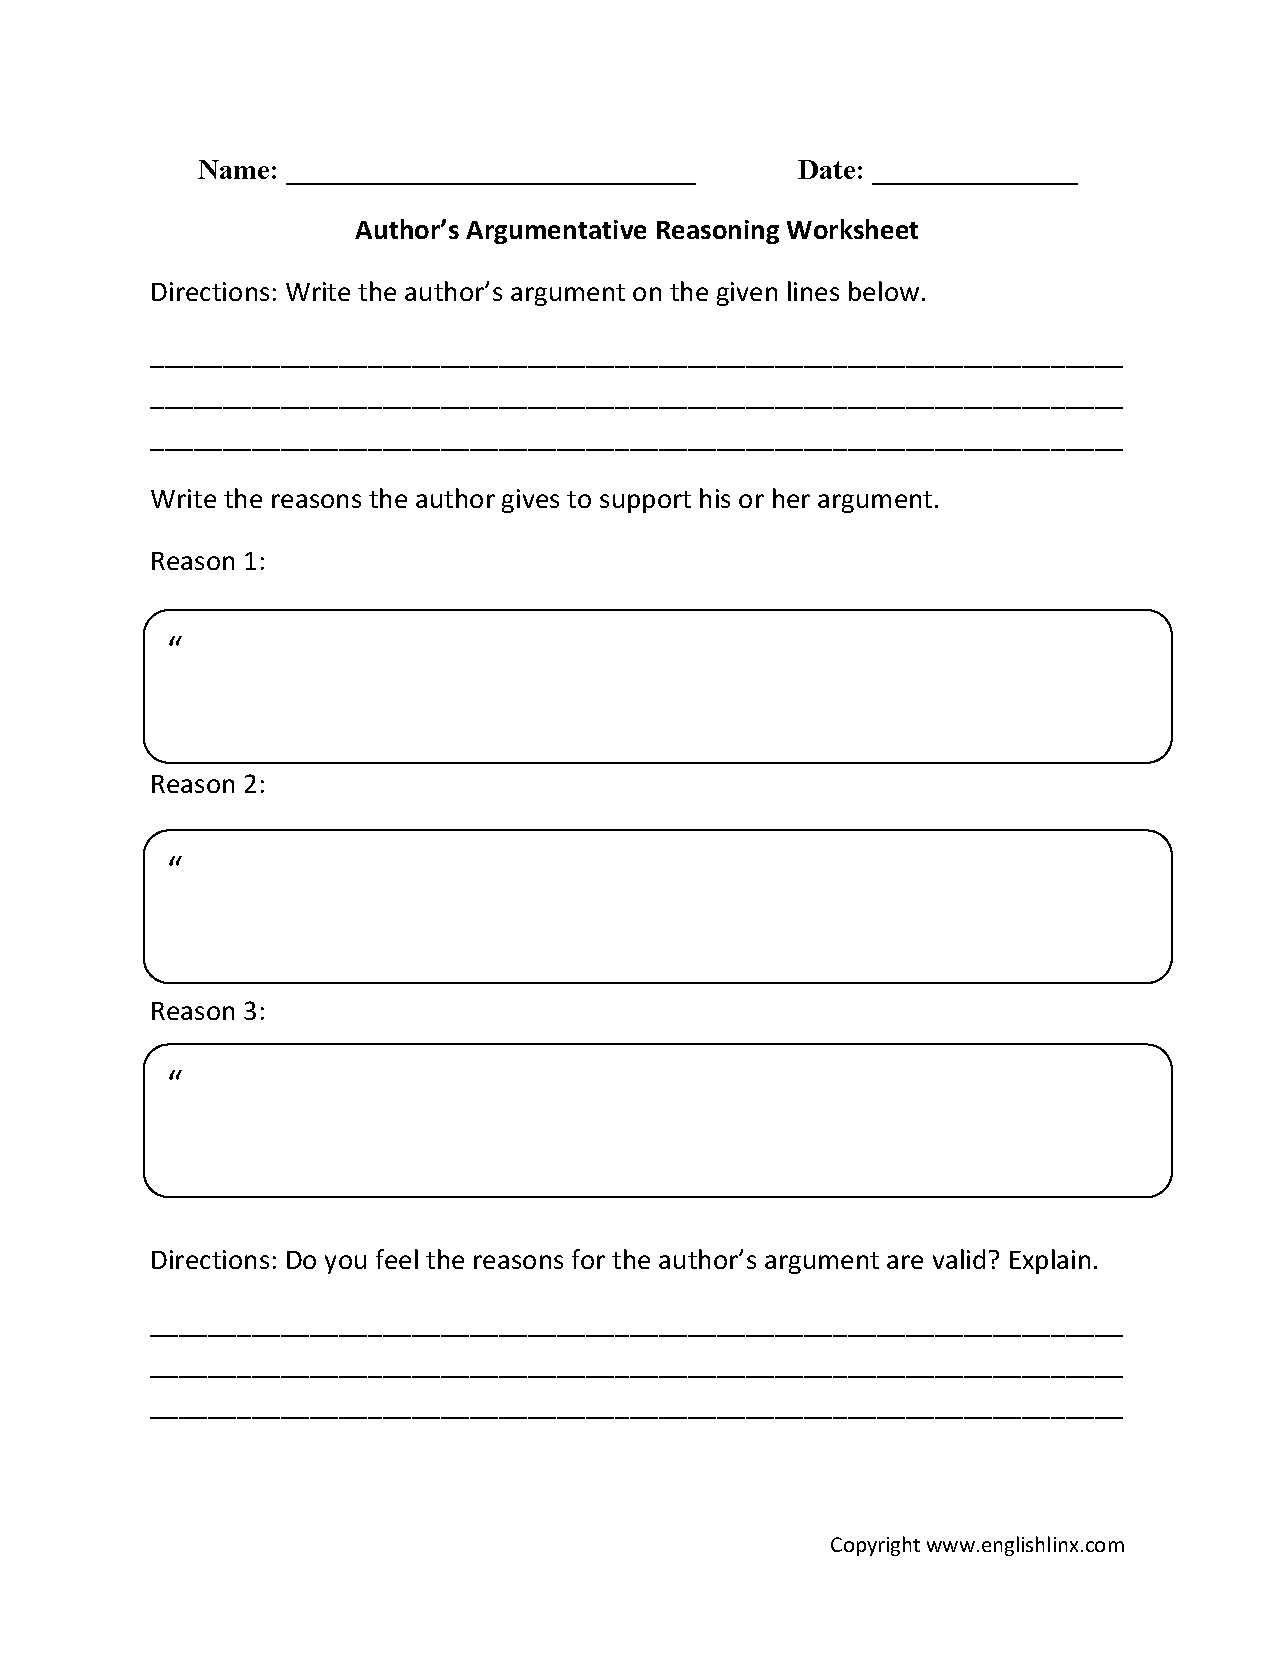 Reading Comprehension Main Idea Worksheets as Well as Reading Prehension Worksheets Chapter Books